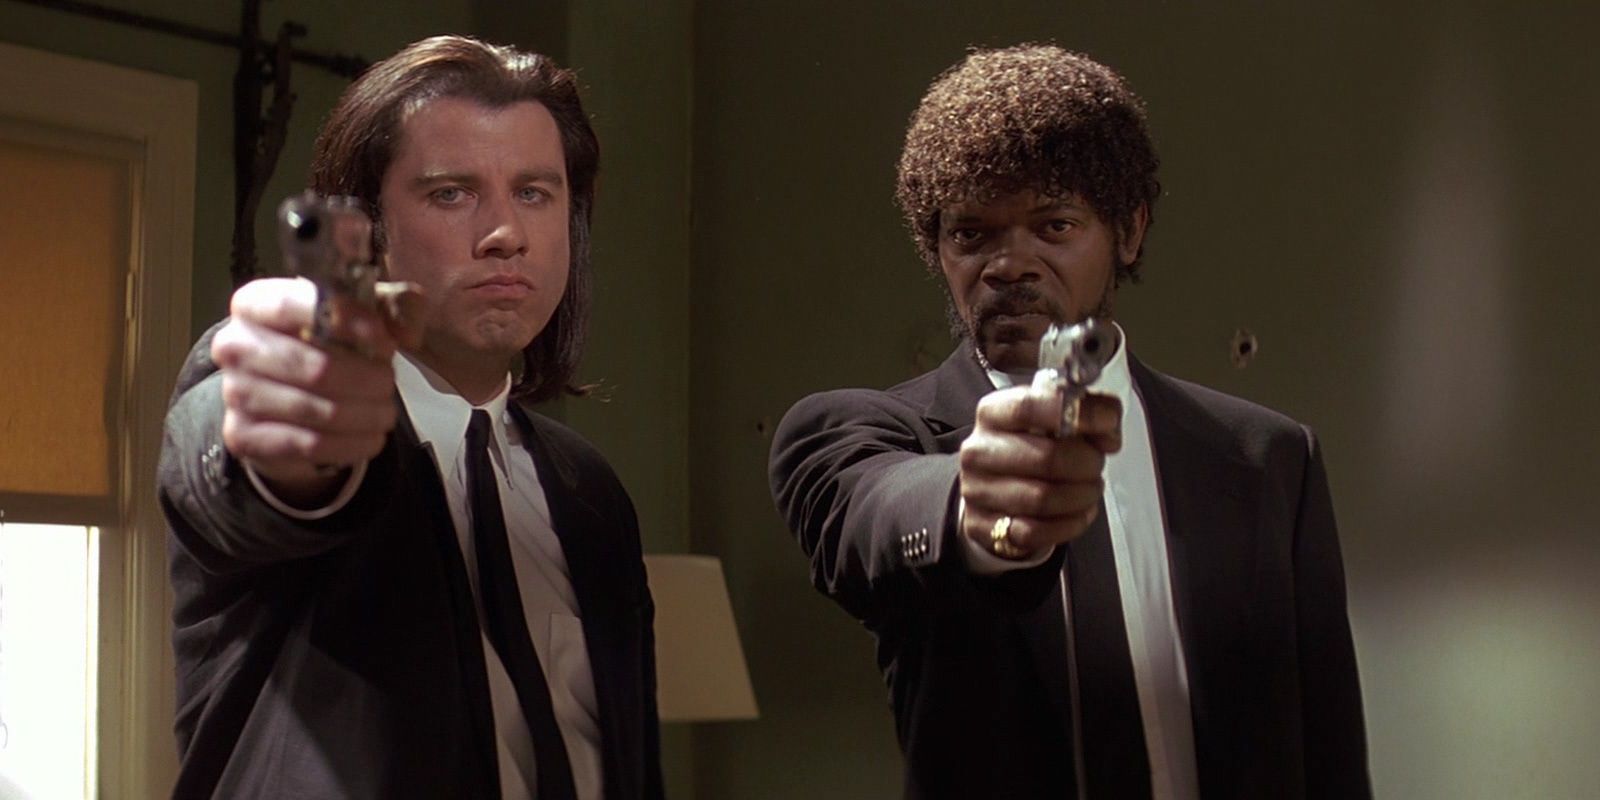 Vincent and Jules pointing their guns in the same direction in Pulp Fiction